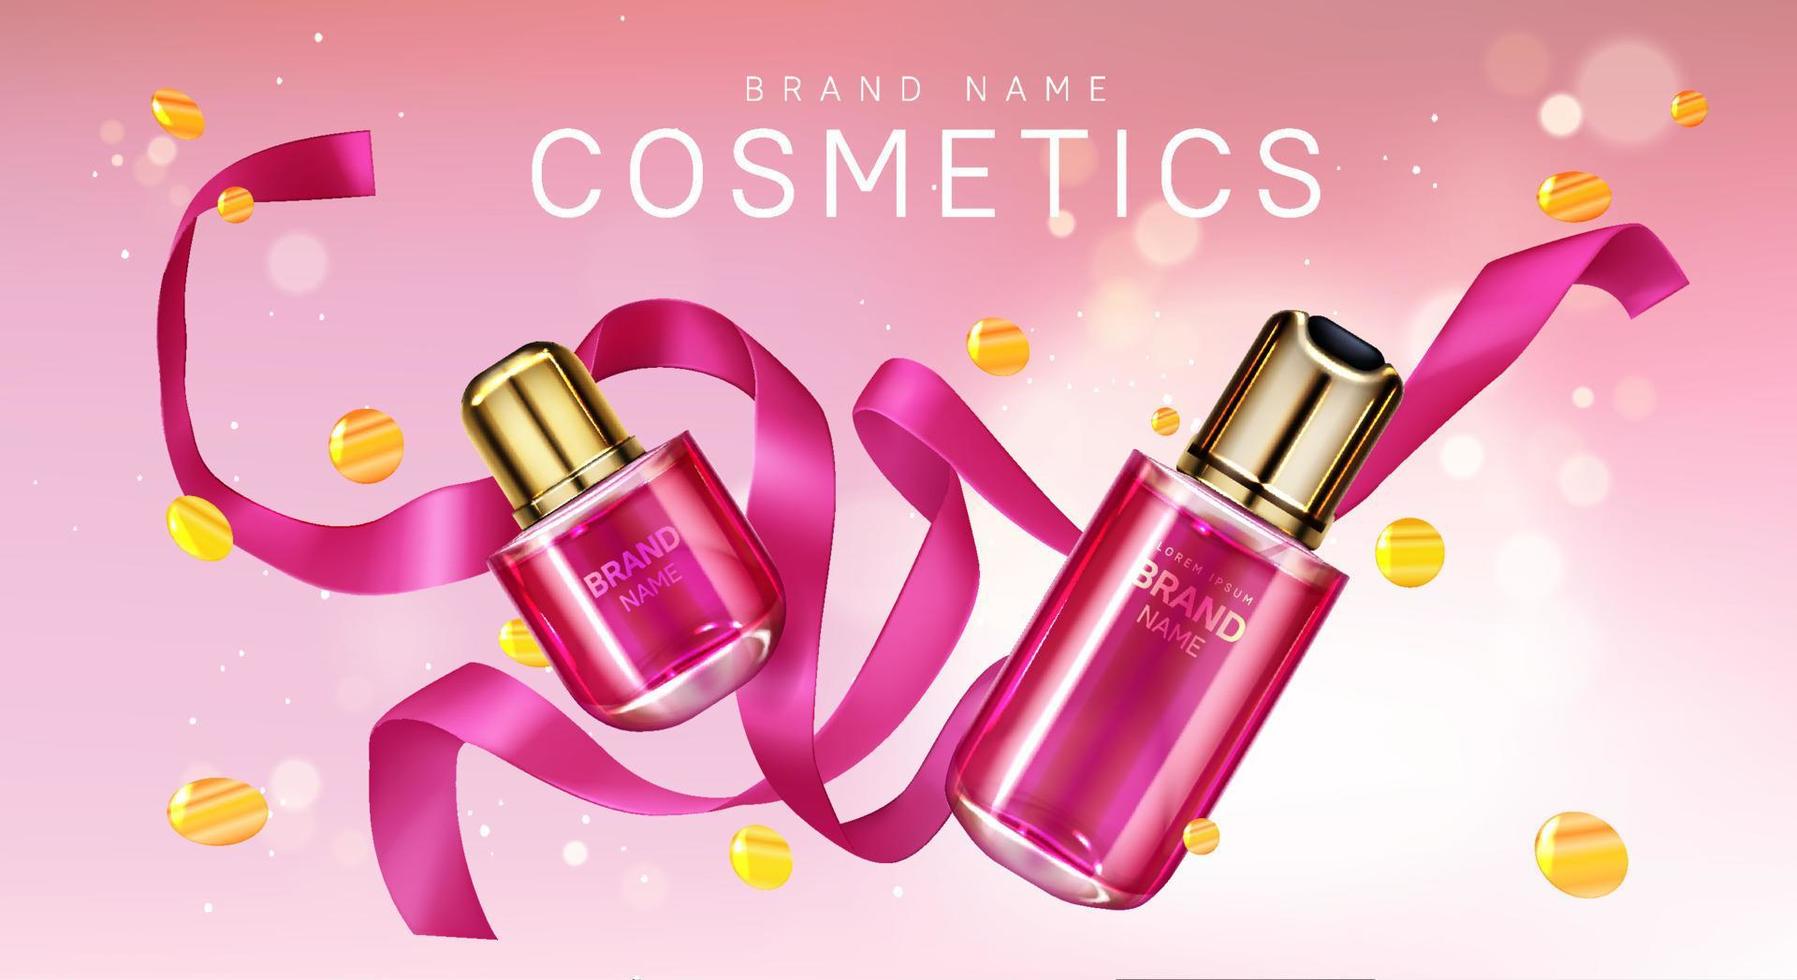 Perfume bottles with pink ribbon and confetti vector